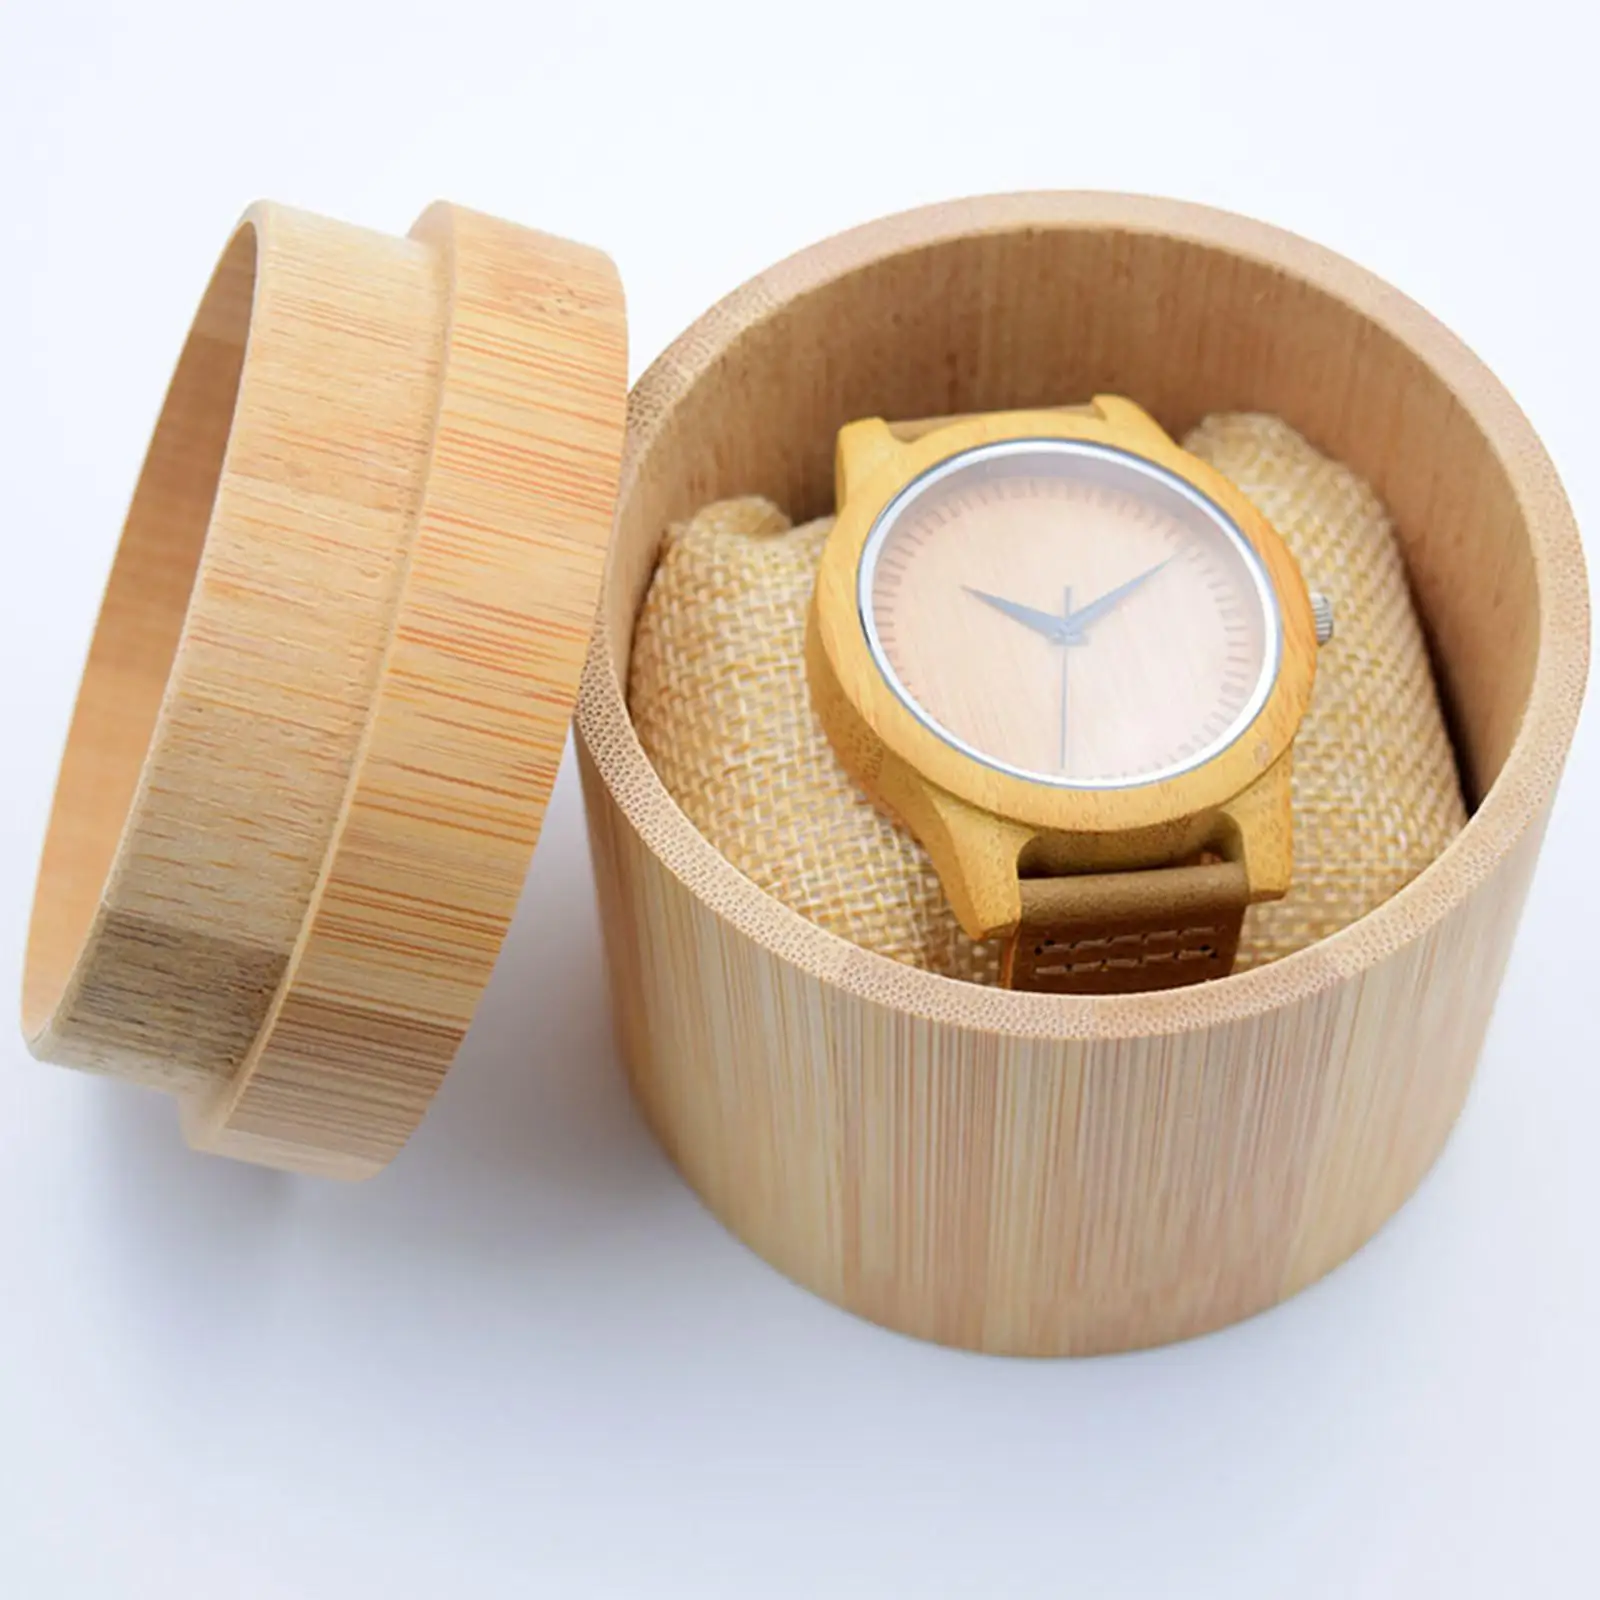 Wooden Watch Storage Case Tough Protection with Pillow Portable Gift Box Holder for Bangles Earrings Men Husband Boyfriend